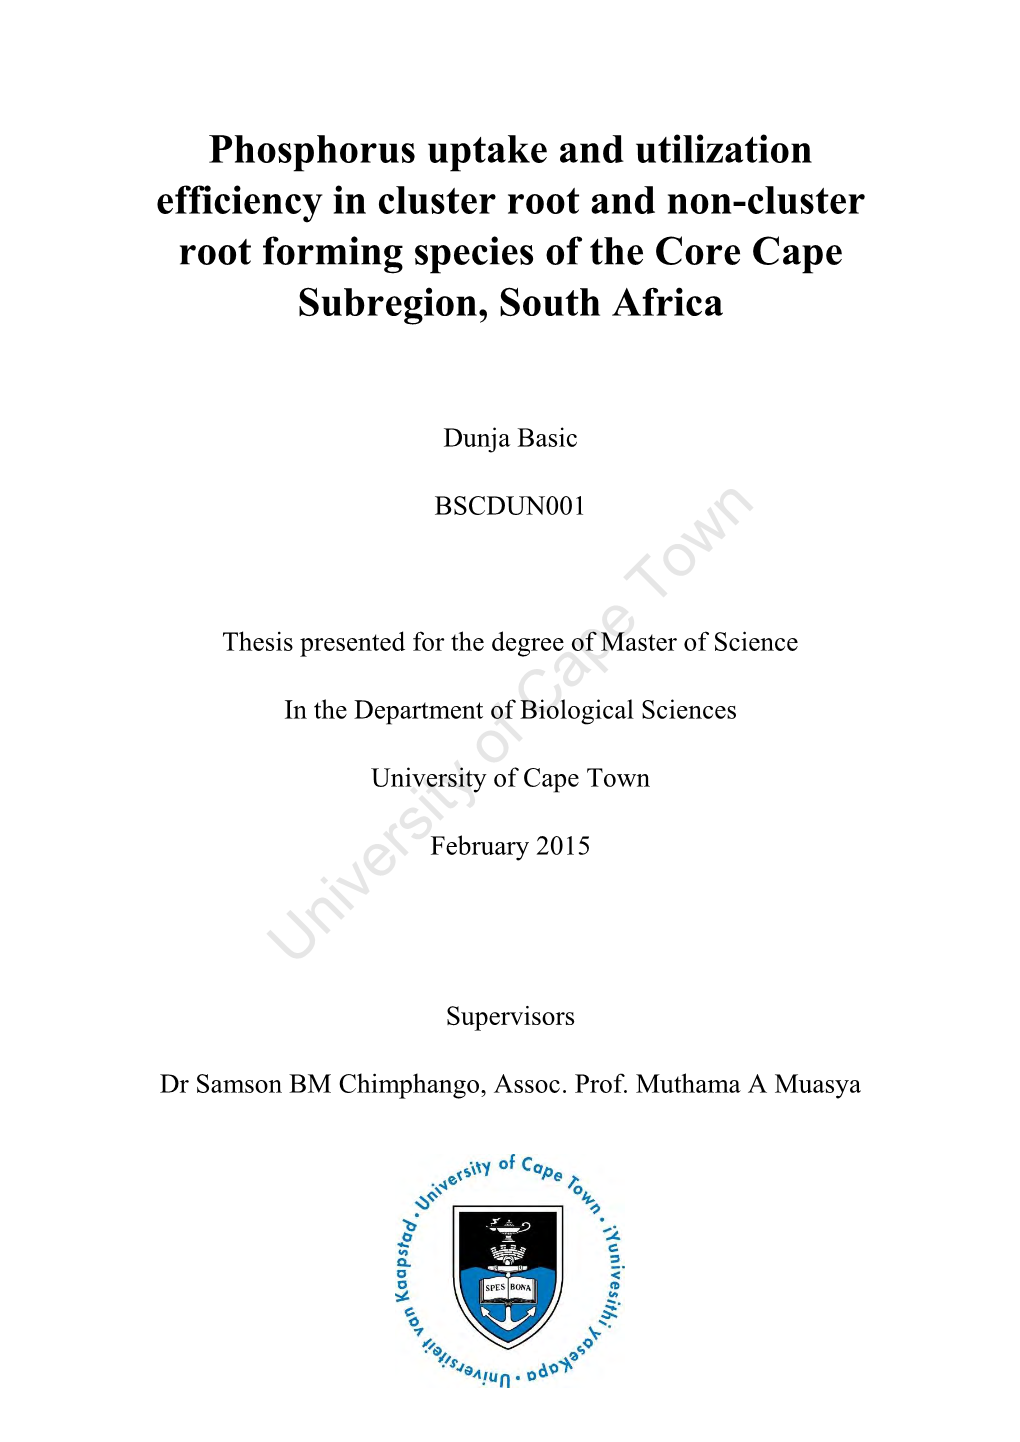 Phosphorus Uptake and Utilization Efficiency in Cluster Root and Non-Cluster Root Forming Species of the Core Cape Subregion, South Africa